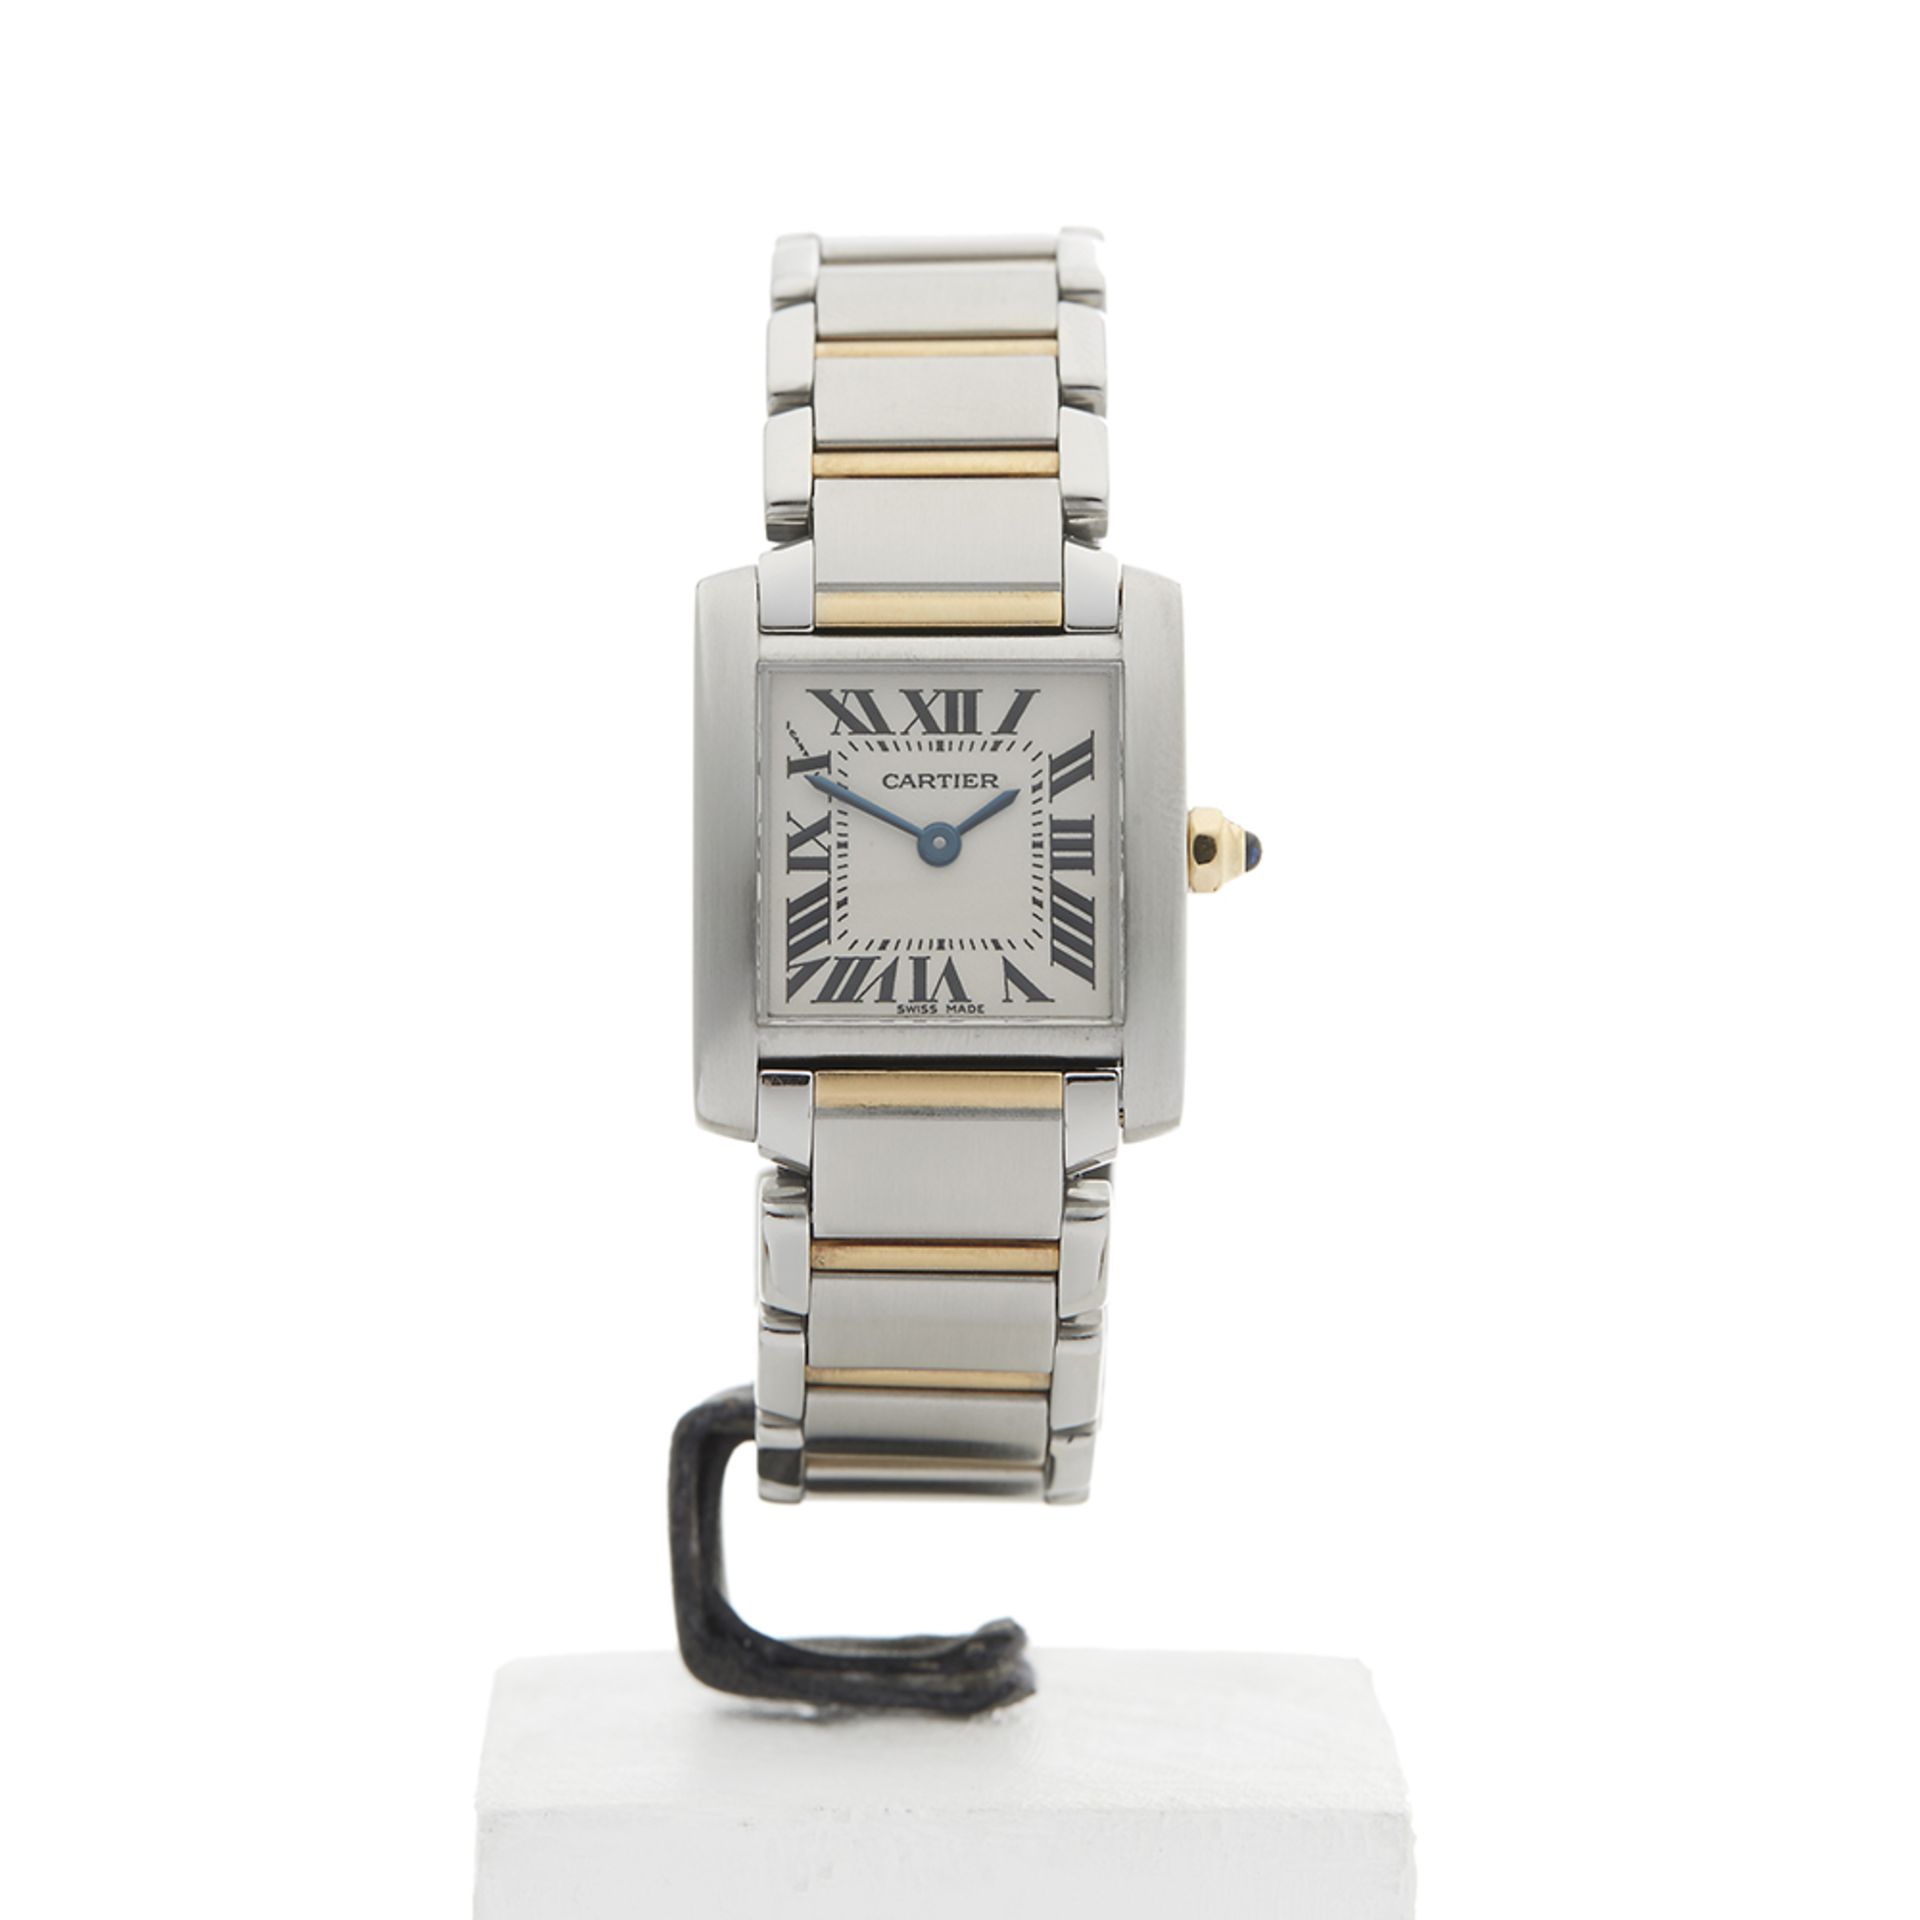 Cartier Tank Francaise 20mm stainless steel and 18k yellow gold 2300 - Image 2 of 8